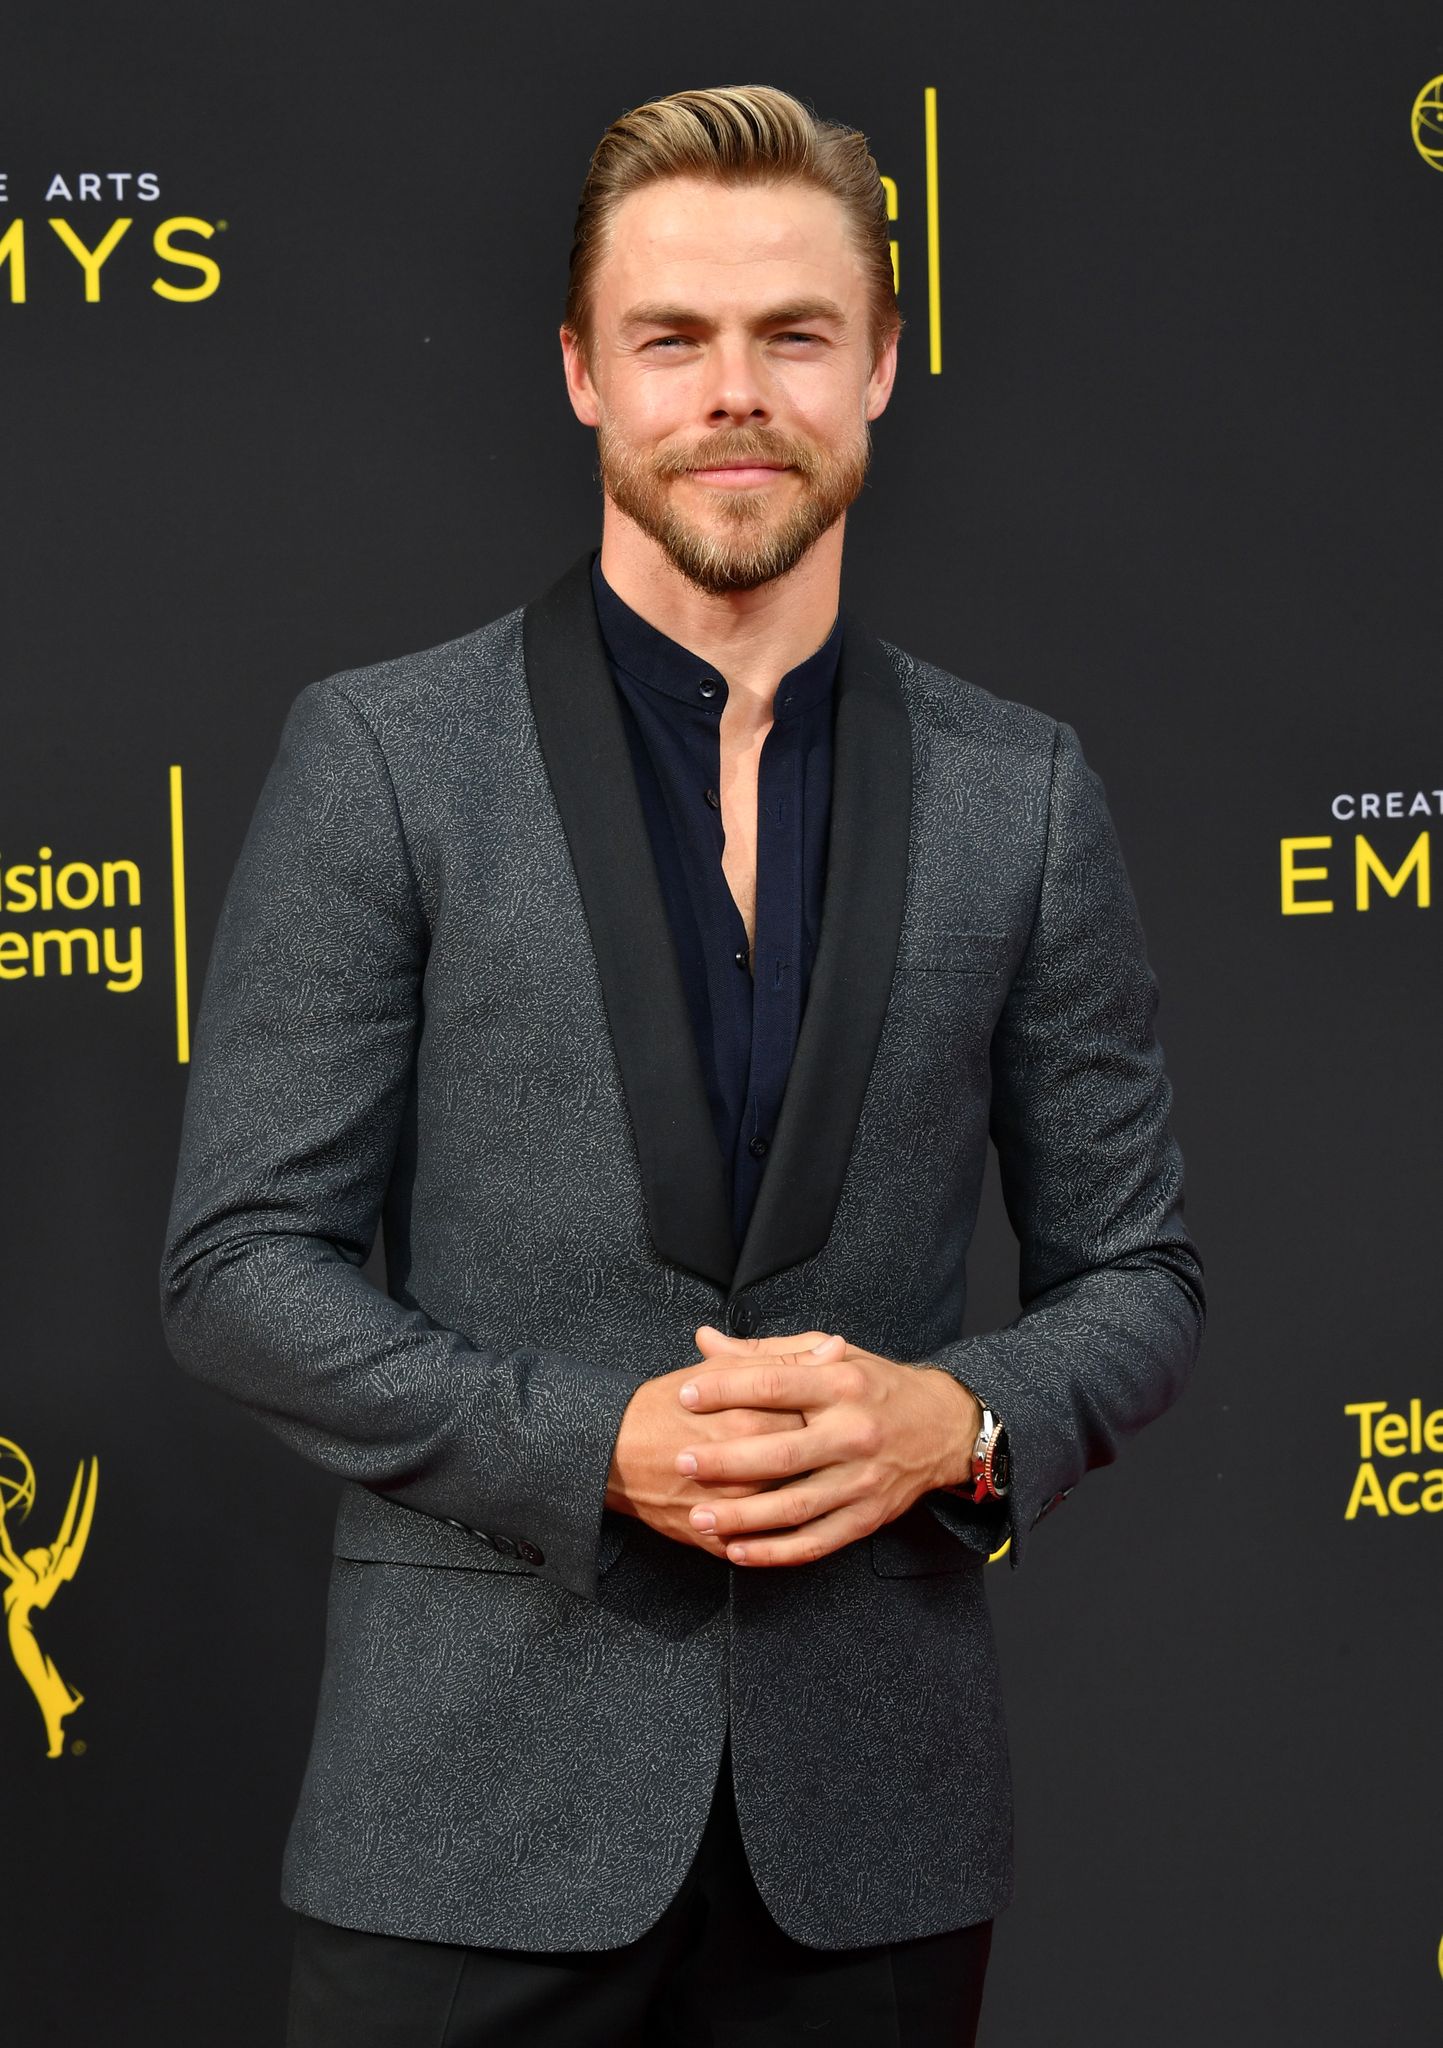 Derek Hough on September 14, 2019 in Los Angeles, California. | Photo: Getty Images